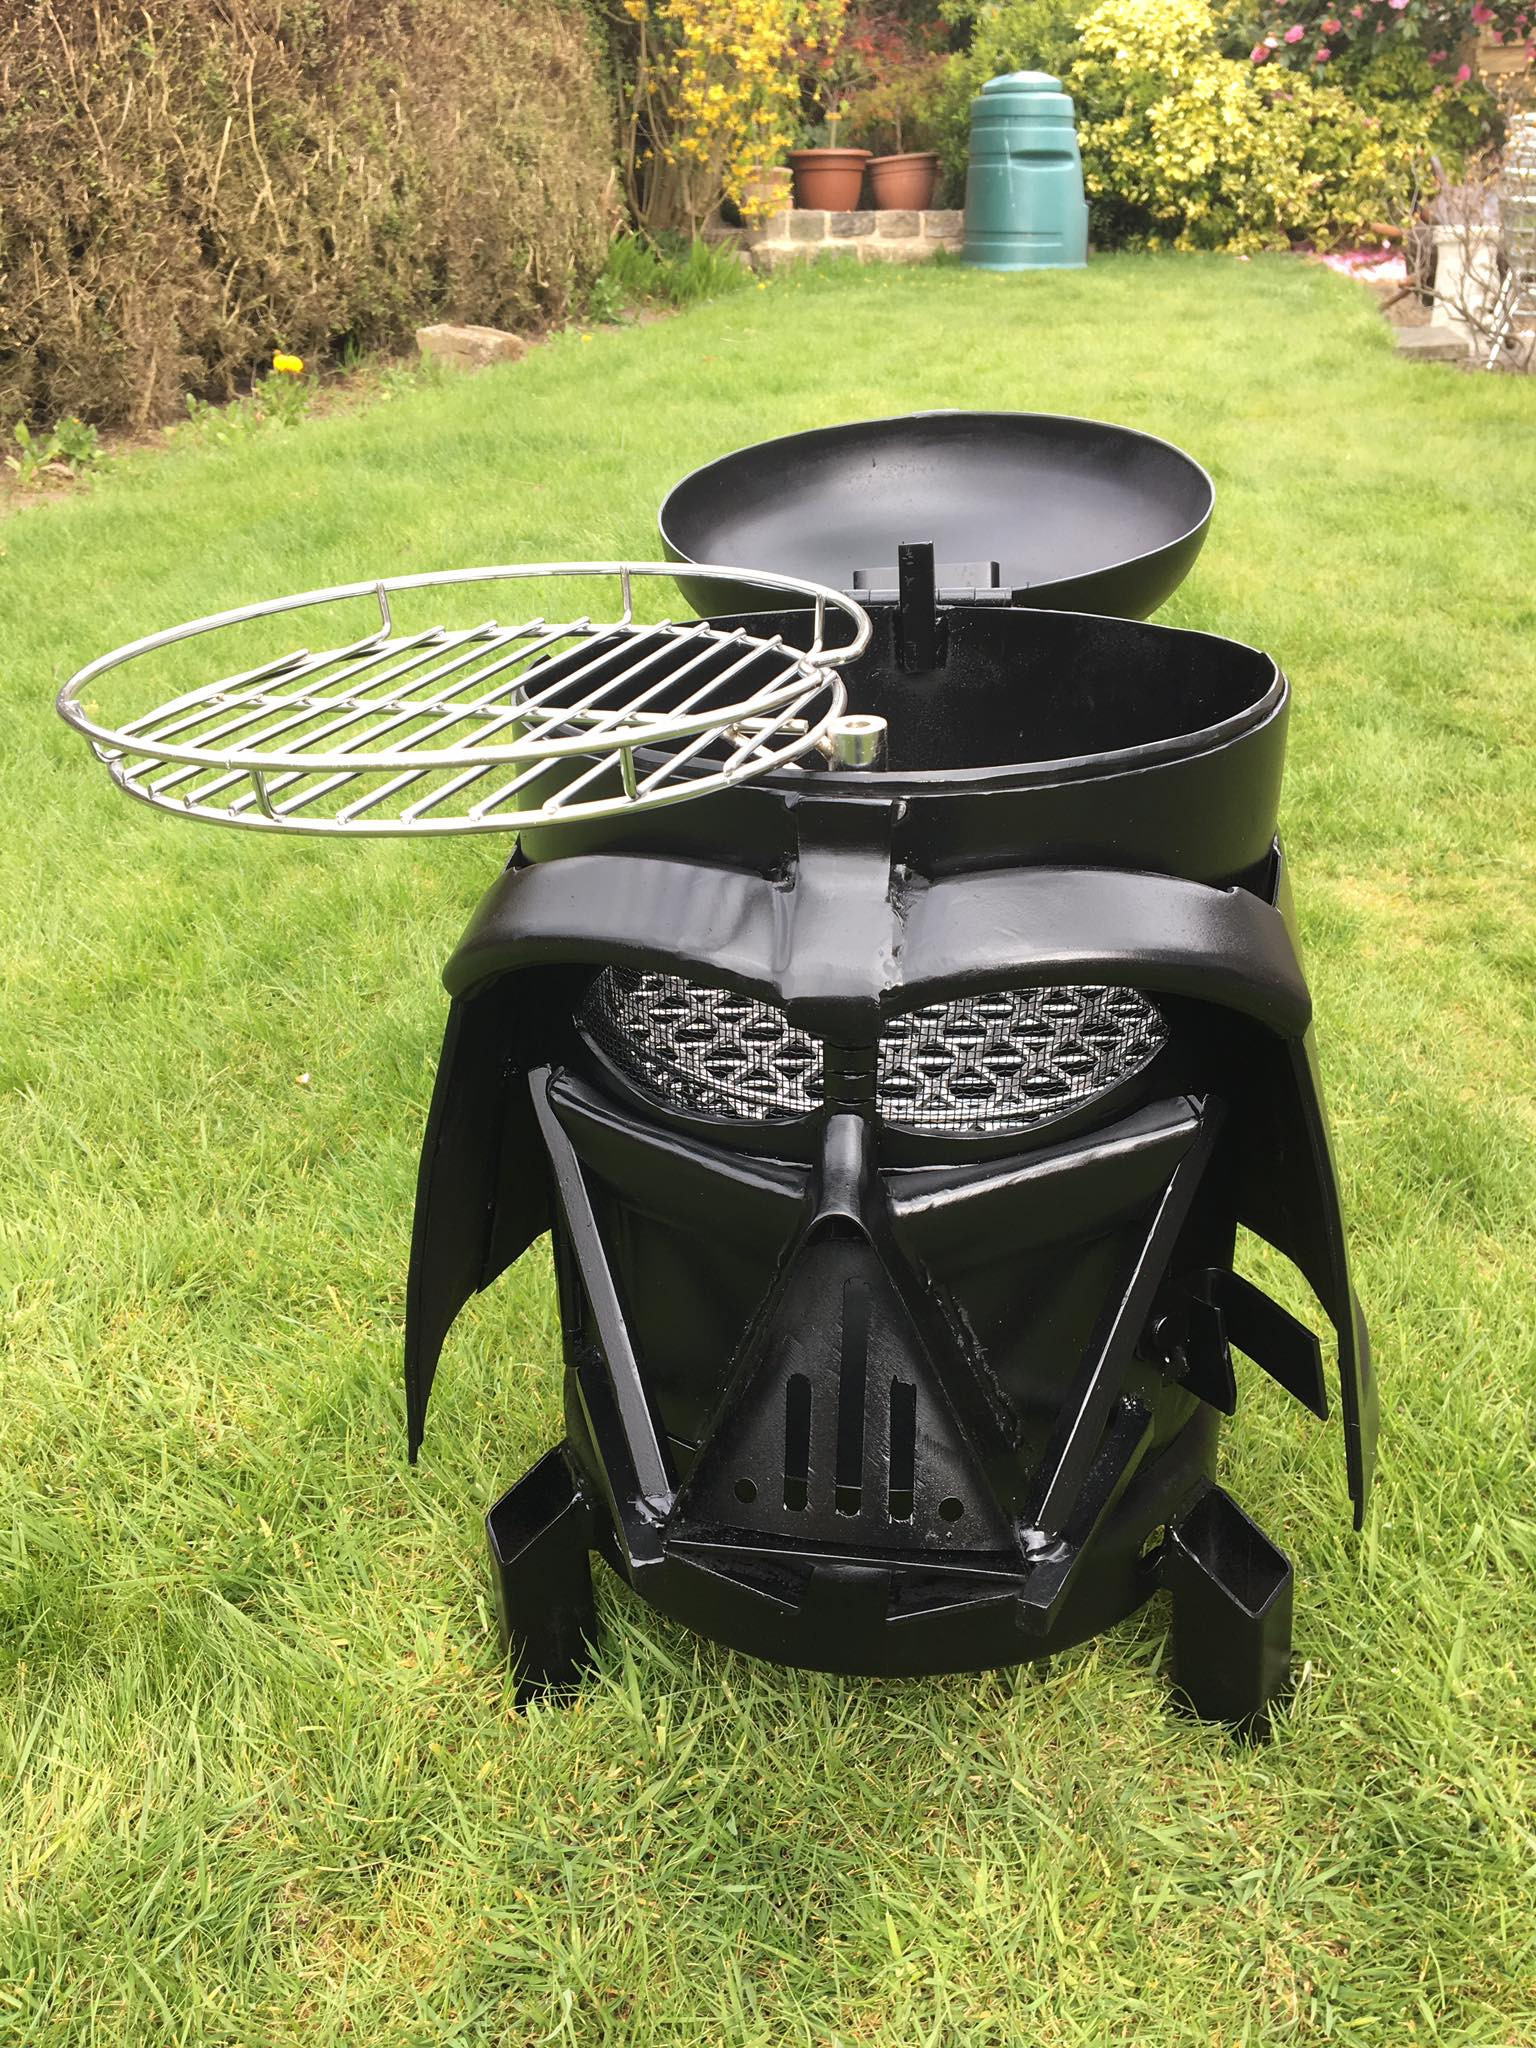 Backyard Grill Grills
 Darth Vader Backyard Grill and Wood Burner He s More BBQ